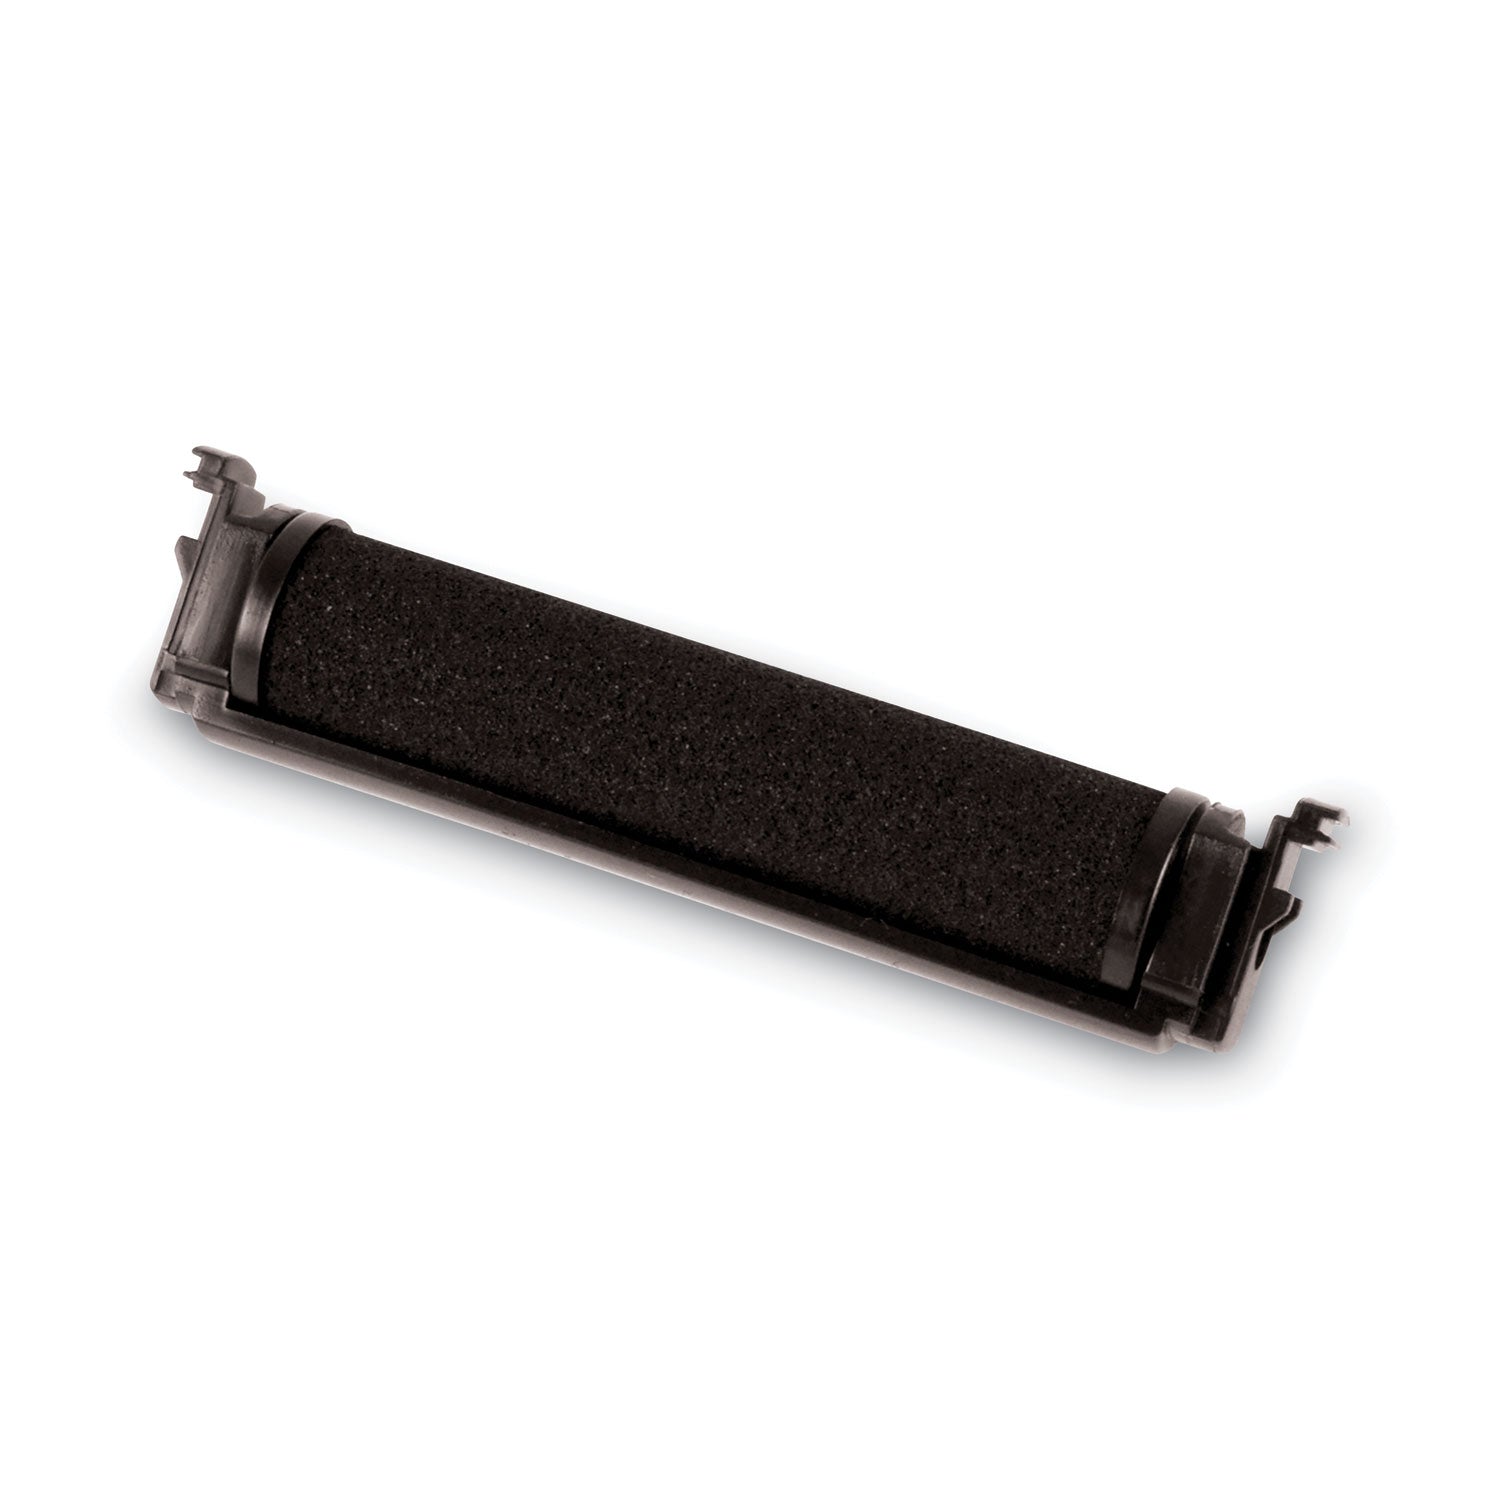 Replacement Ink Roller for 2000PLUS ES 011091 Line Dater, 2" x 1", Black - 